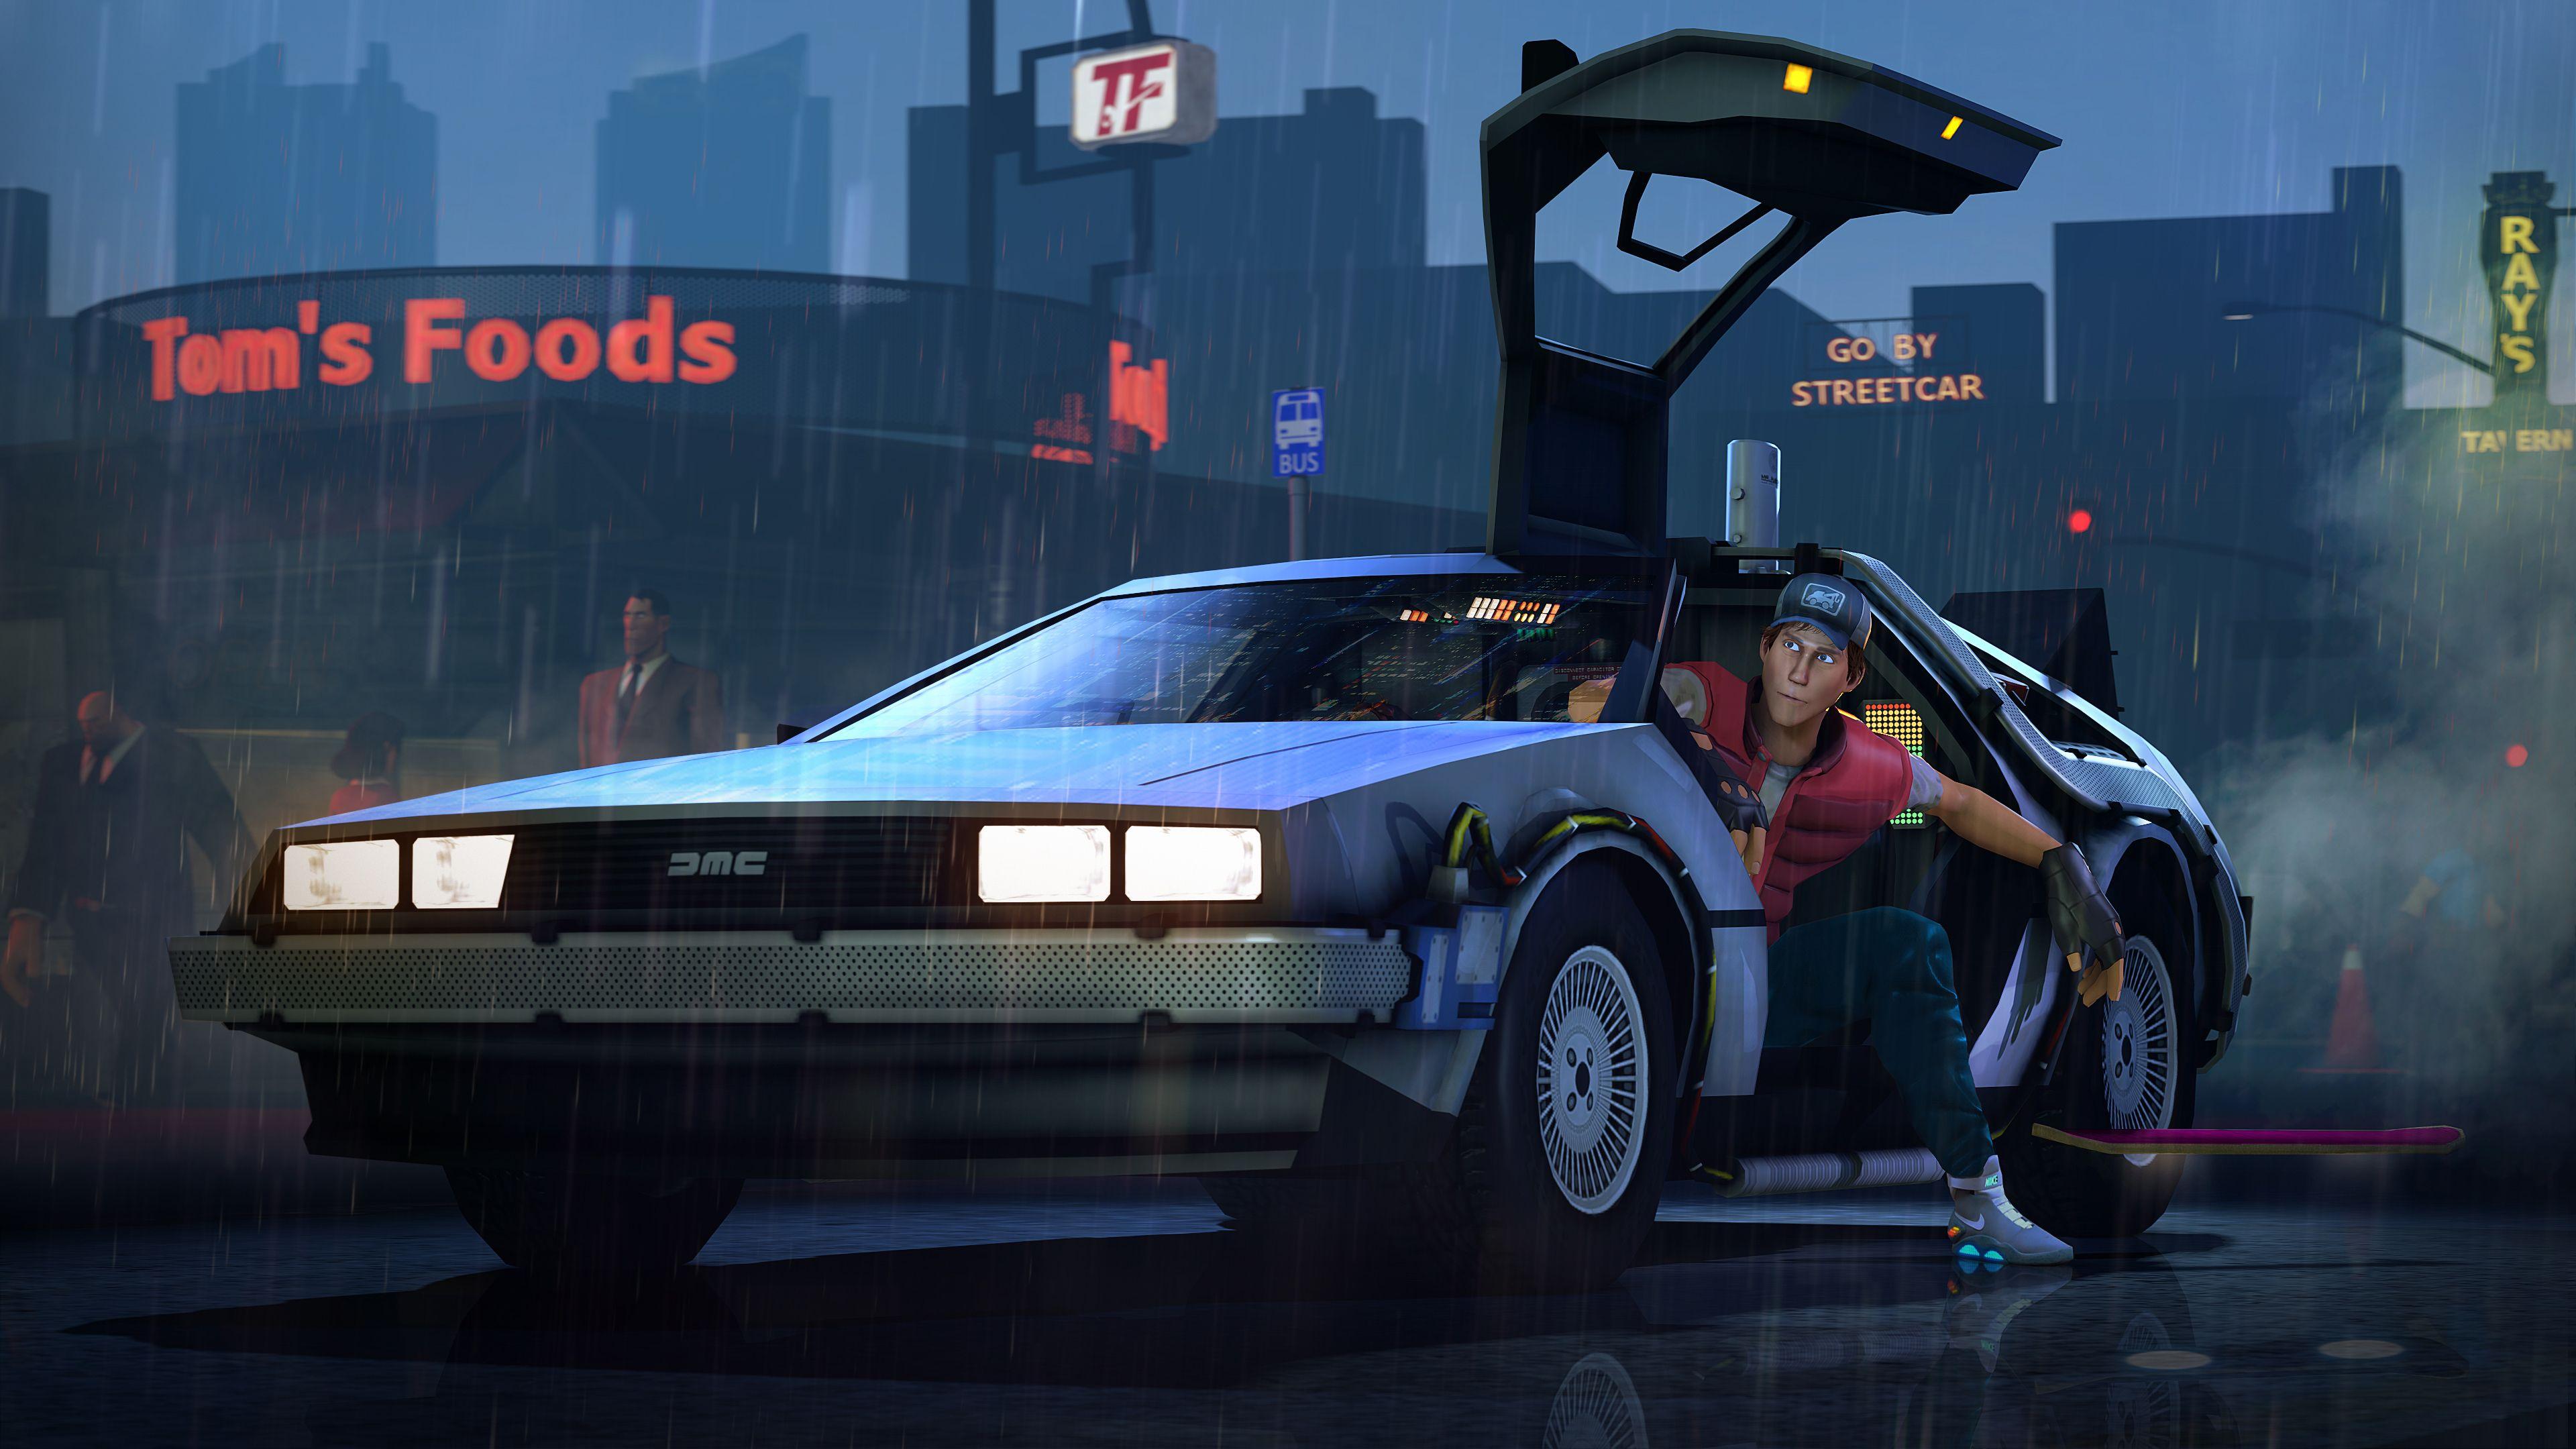 Delorean Back To The Future Wallpapers Wallpaper Cave